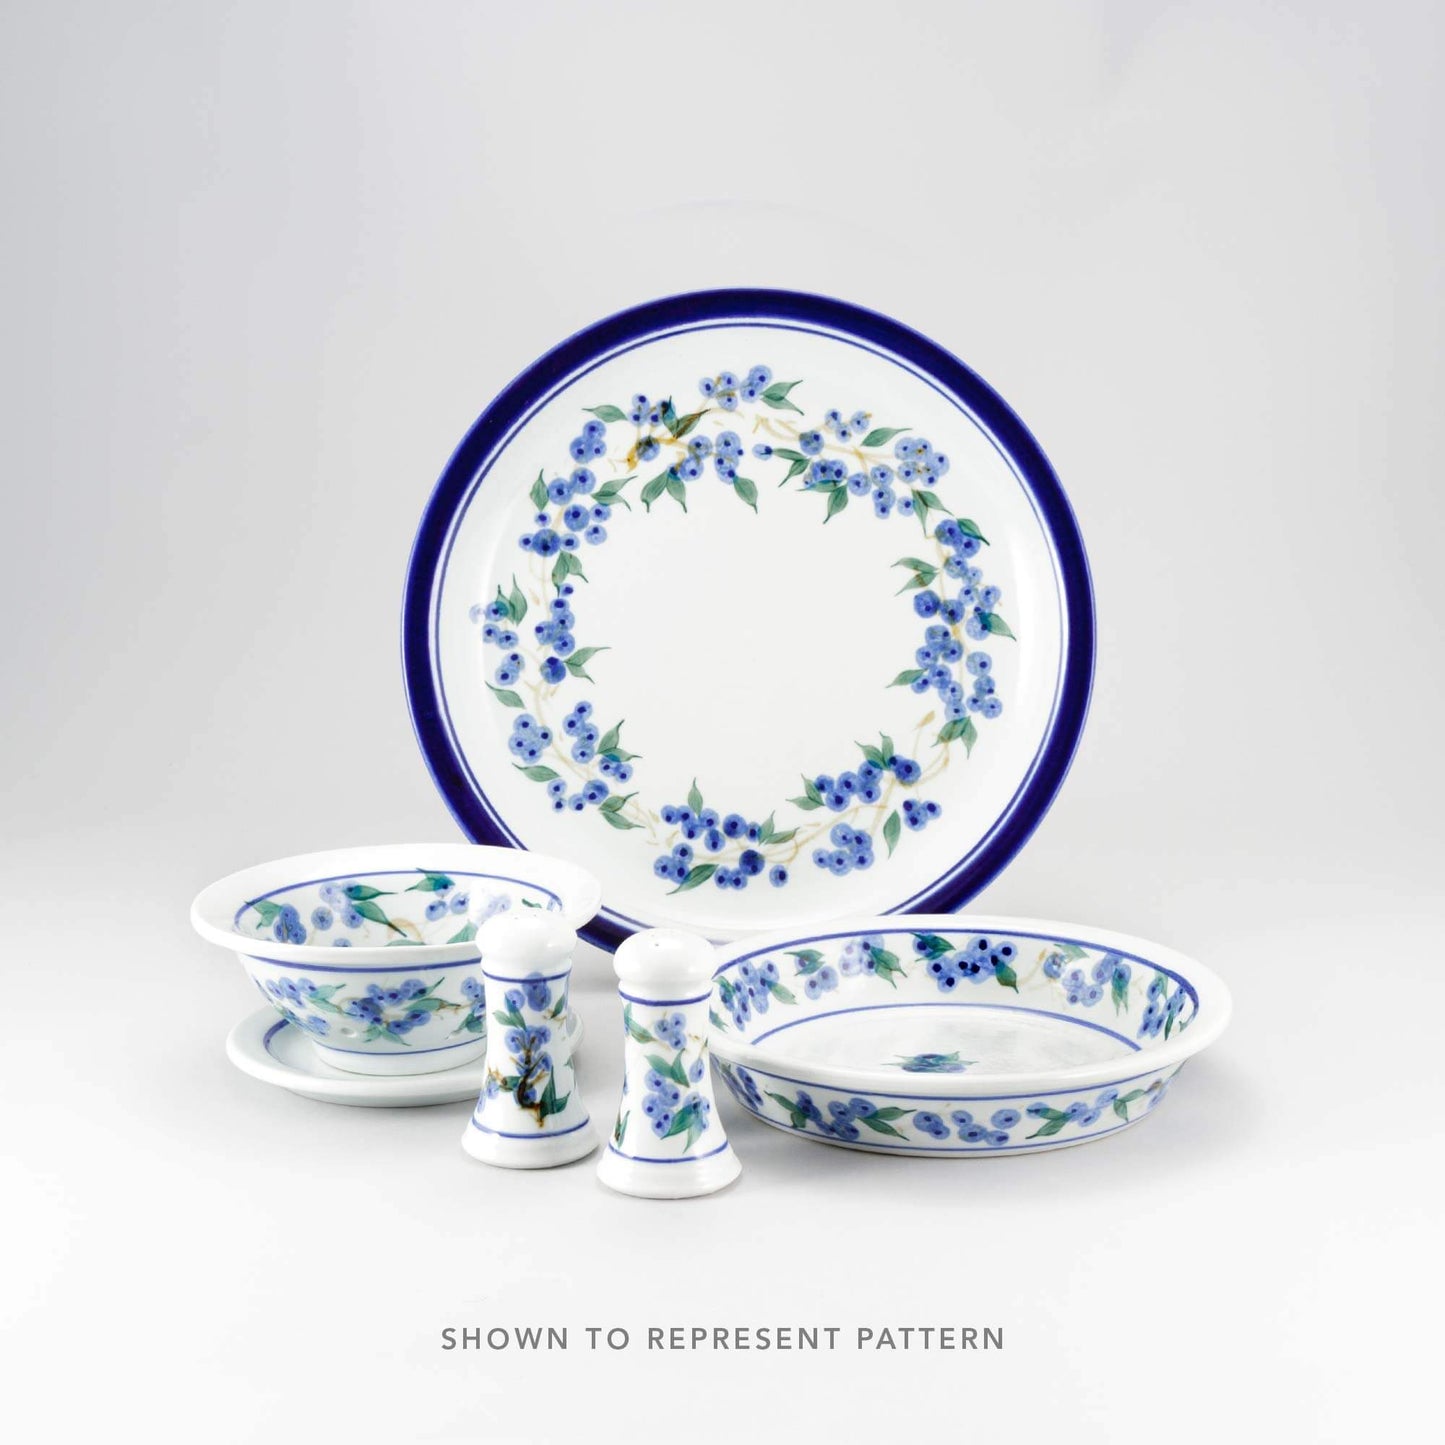 Handmade Pottery Brie Baker in Blueberry pattern made by Georgetown Pottery in Maine